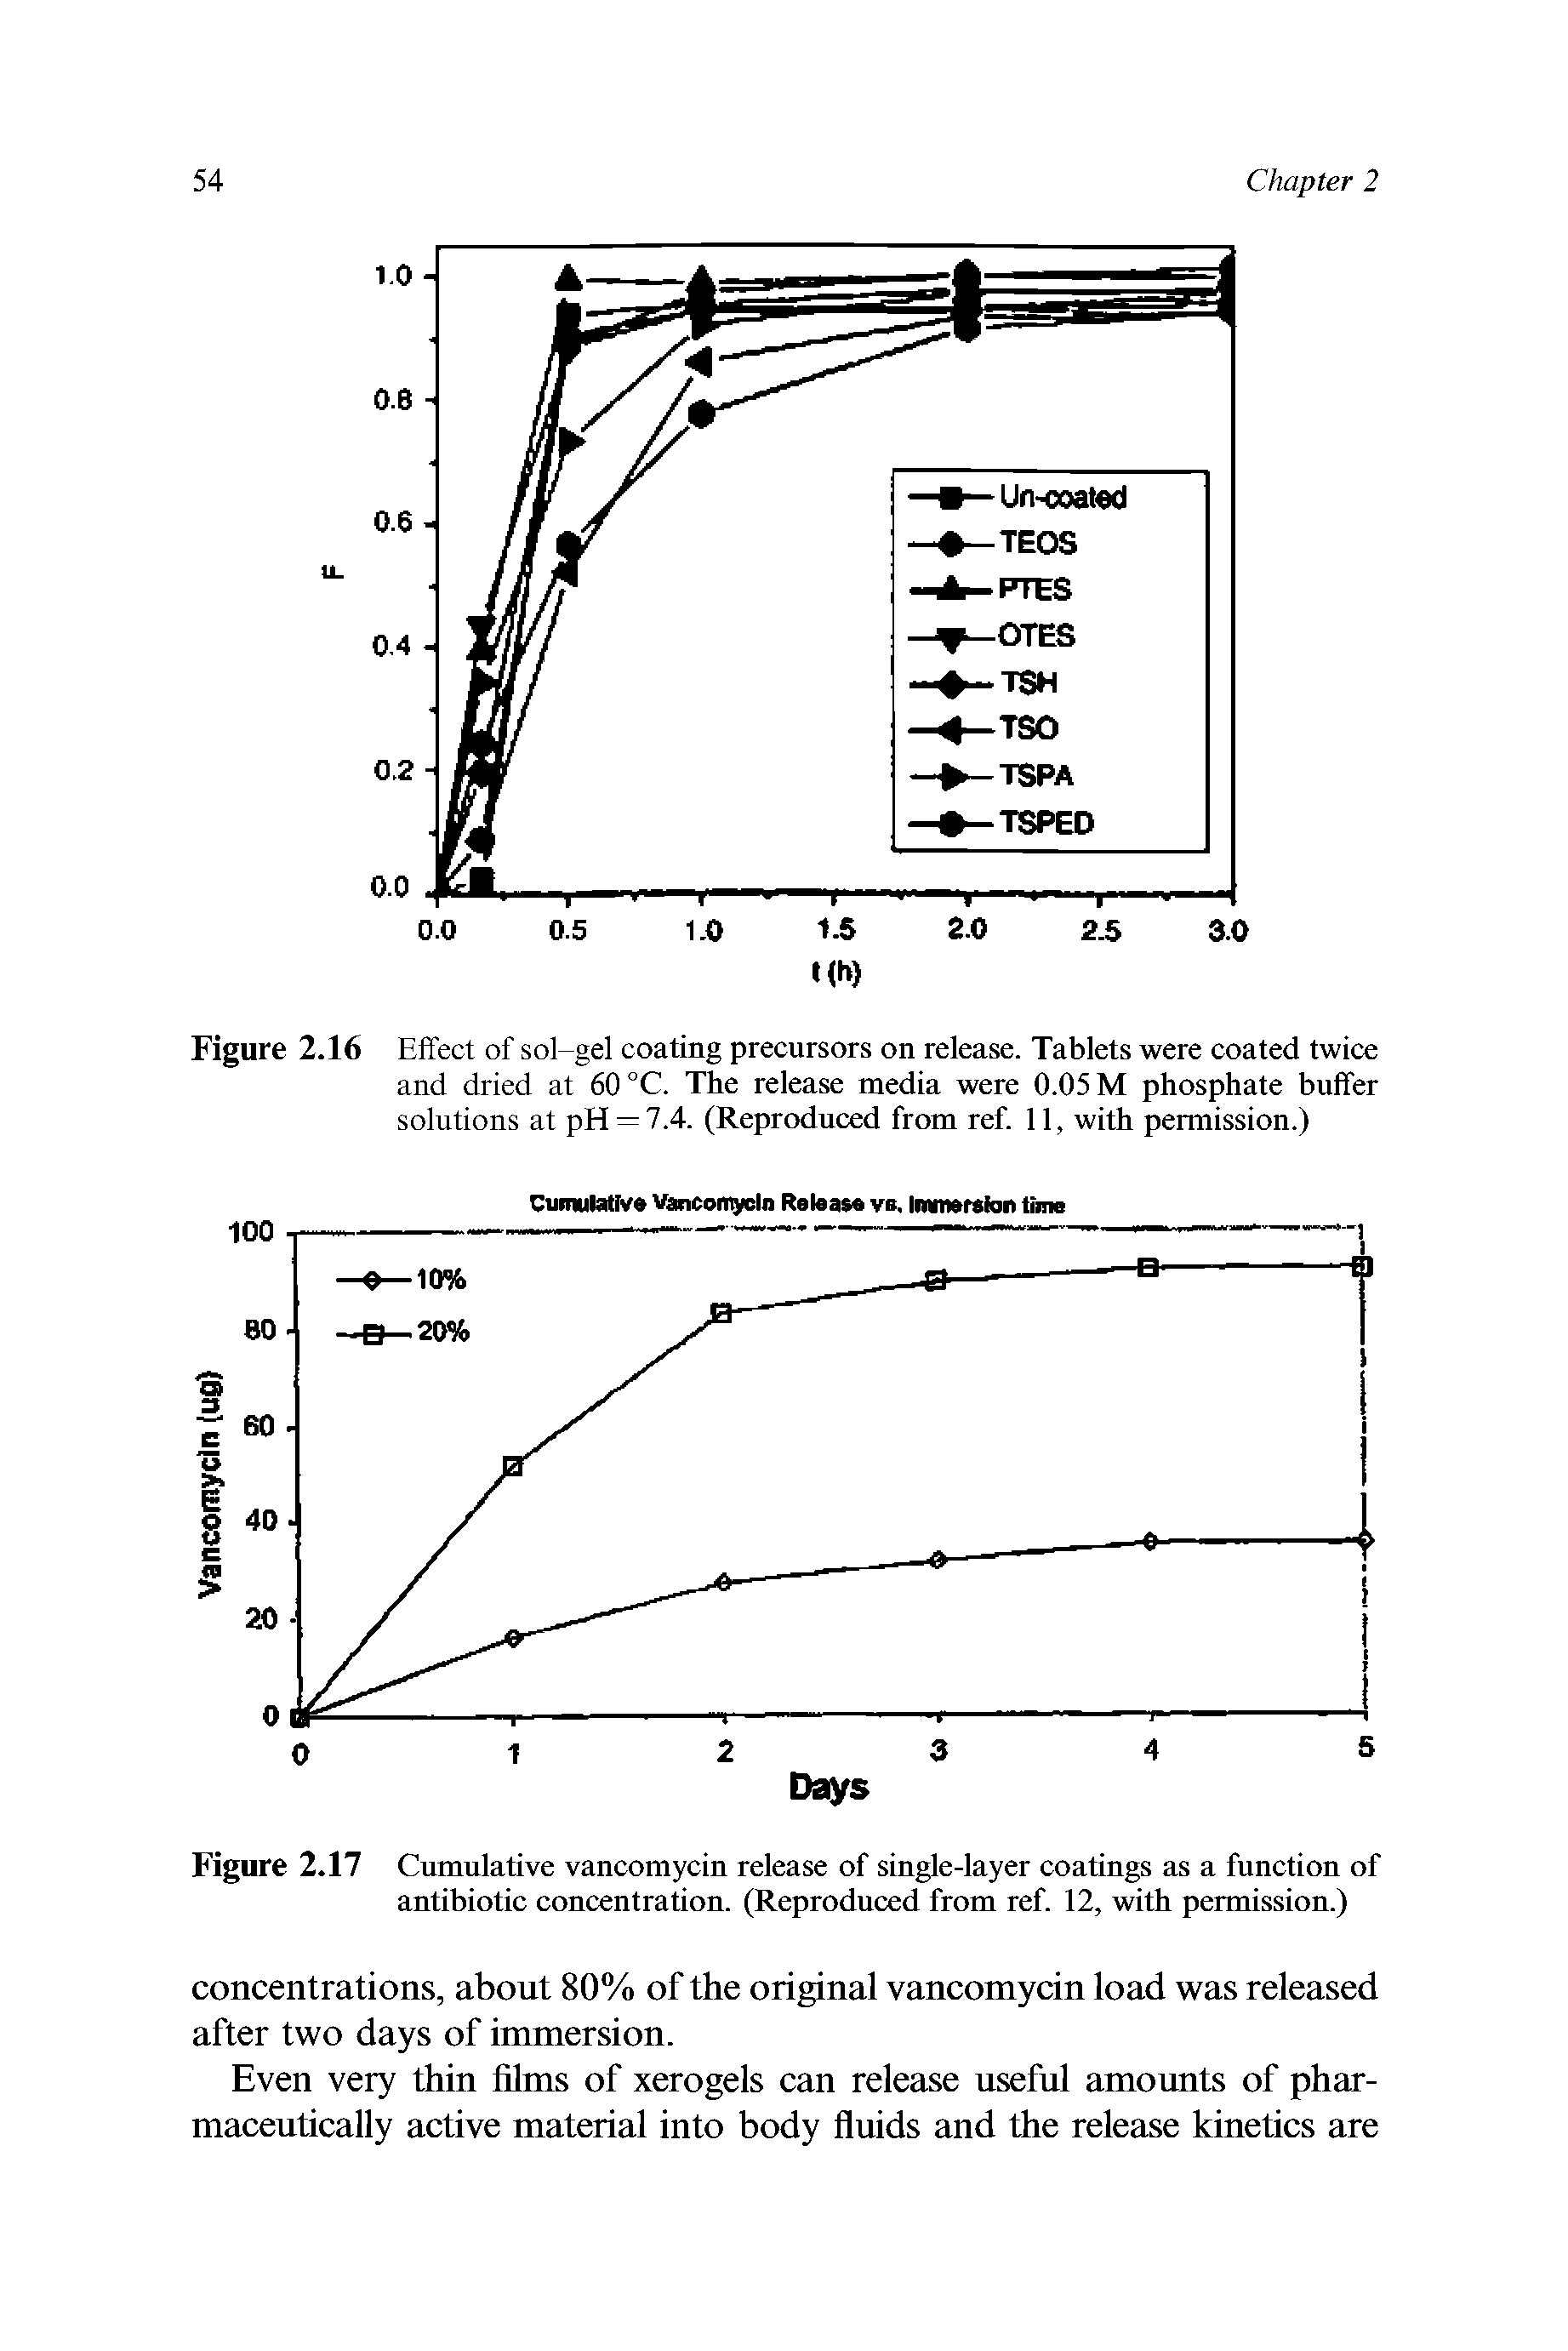 Figure 2.16 Effect of sol-gel coating precursors on release. Tablets were coated twice and dried at 60 °C. The release media were 0.05 M phosphate buffer solutions at pH = 7.4. (Reproduced from ref. 11, with permission.)...